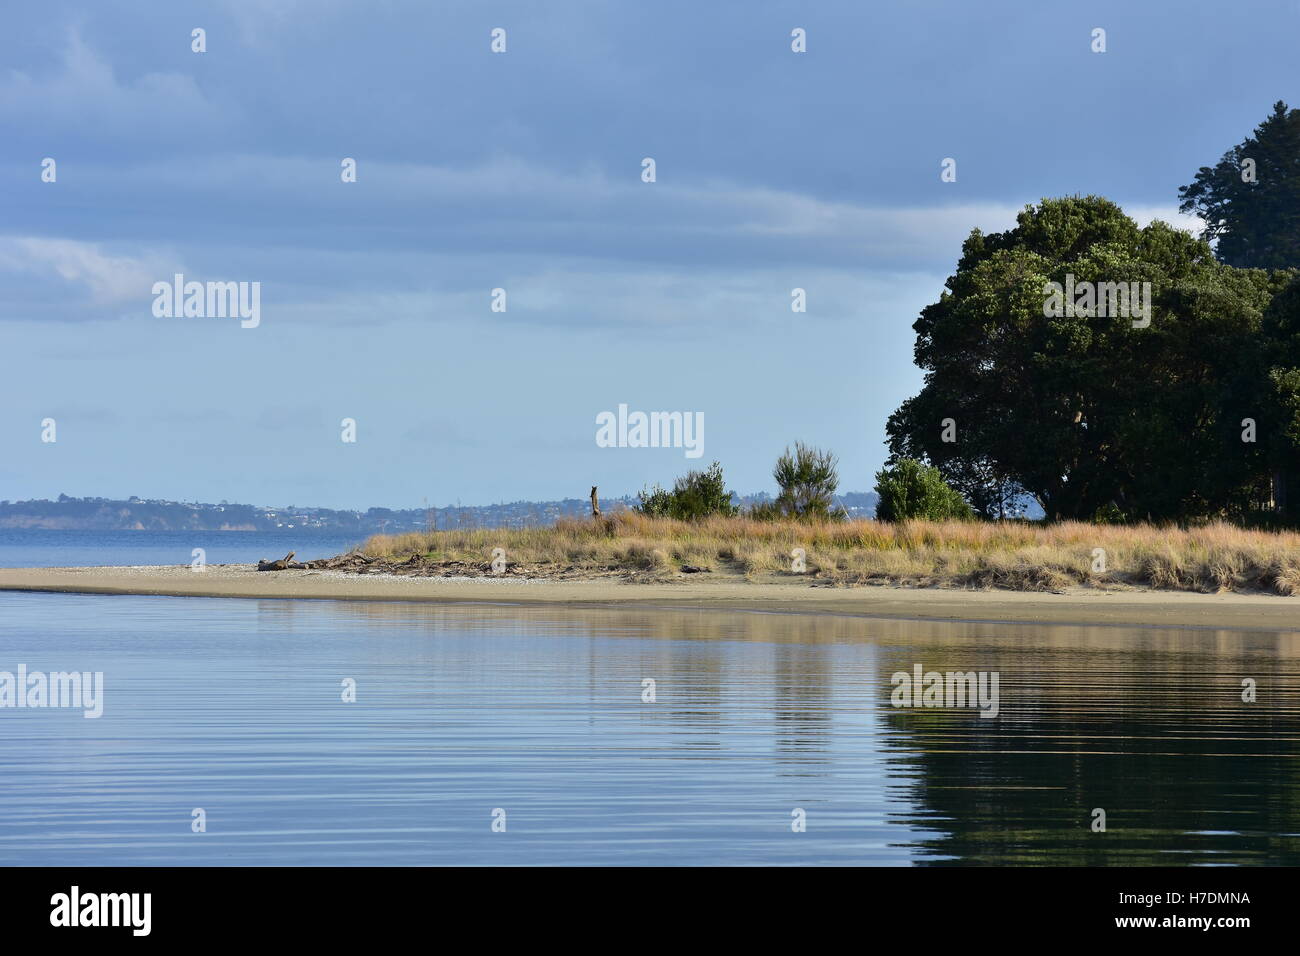 Mirror-like sea in the mouth of an estuary. Stock Photo